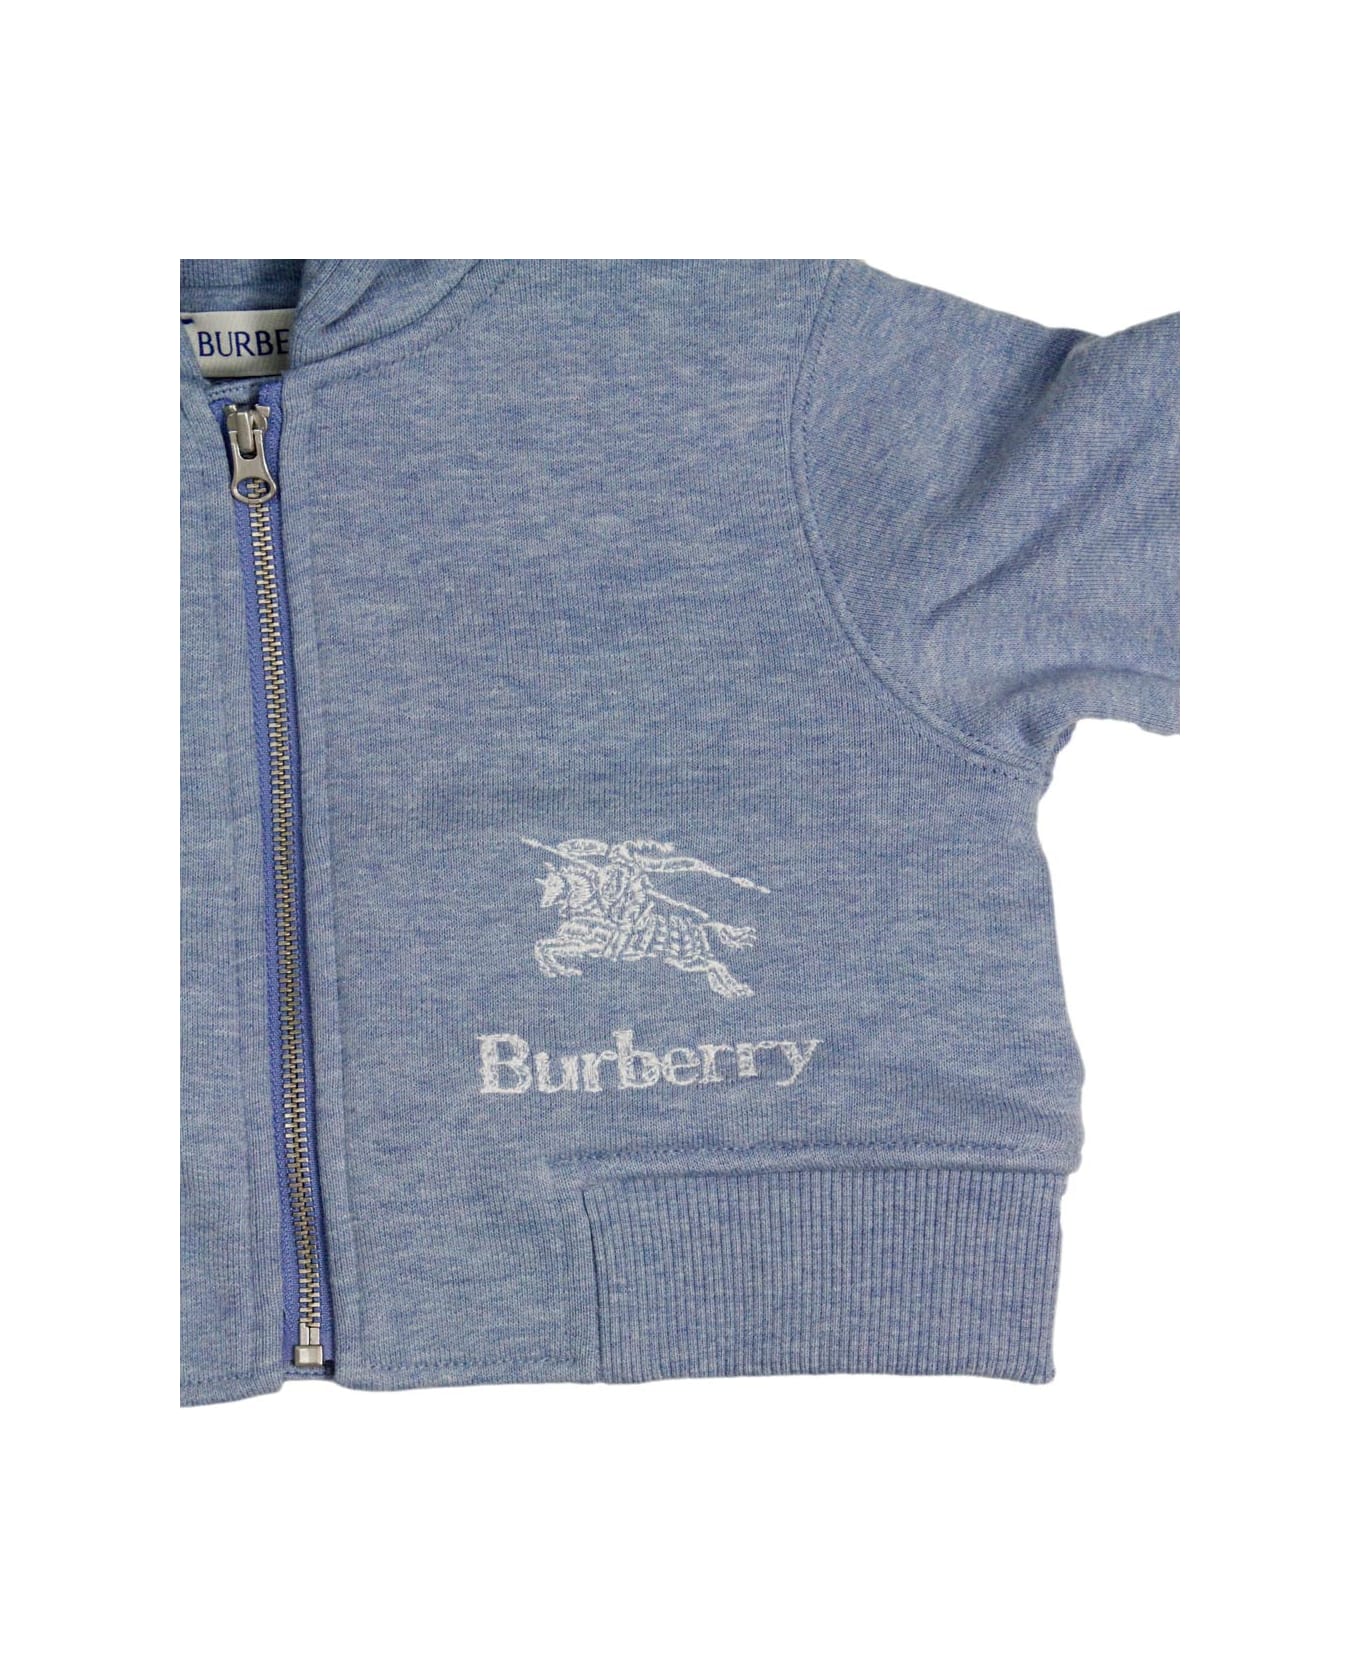 Burberry Full Zip Hooded Sweatshirt With Long Sleeves In Fine Cotton With Logo On The Front - Light Blu ニットウェア＆スウェットシャツ